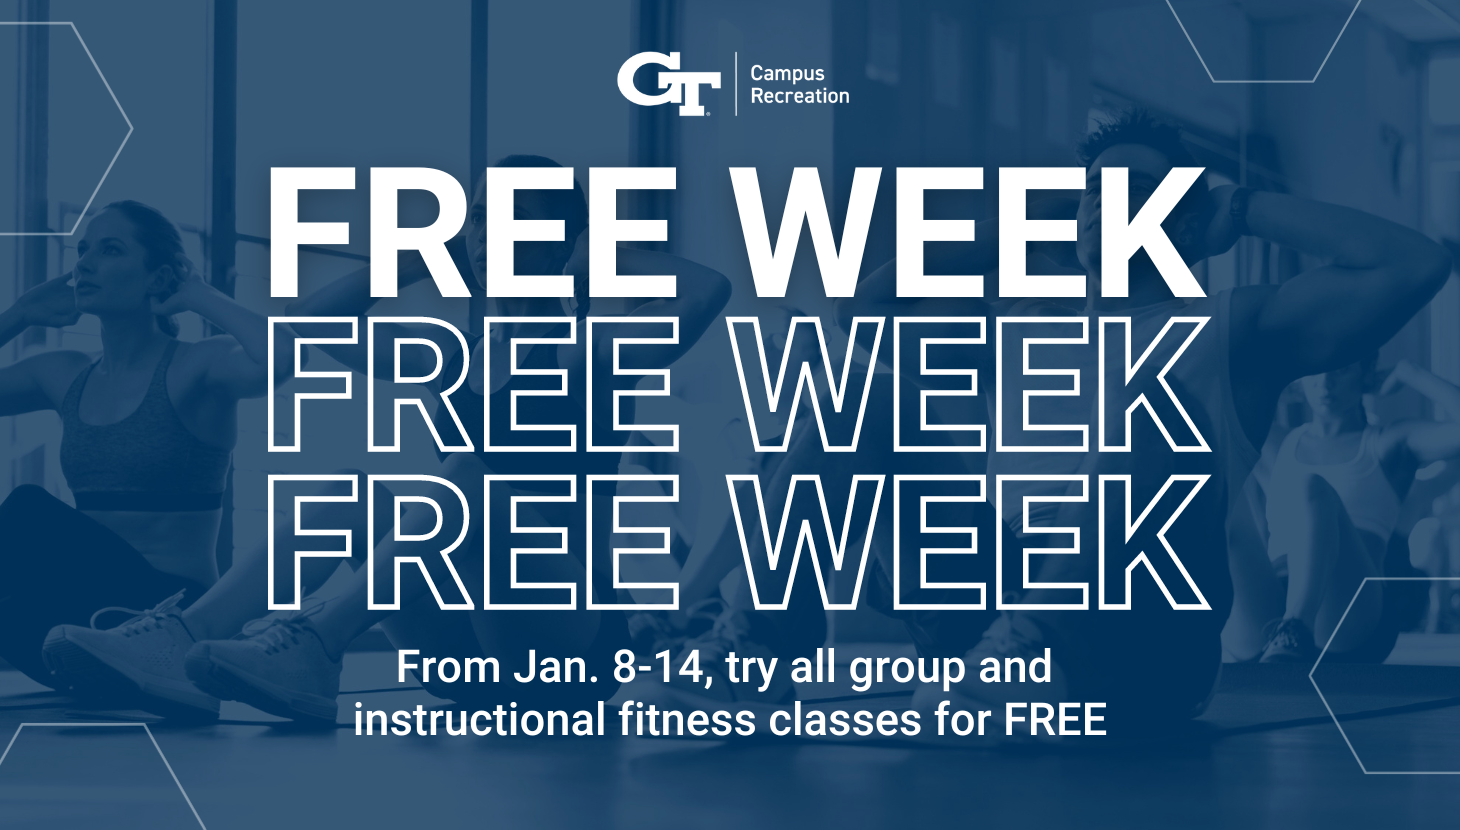 Group Fitness, Campus Recreation